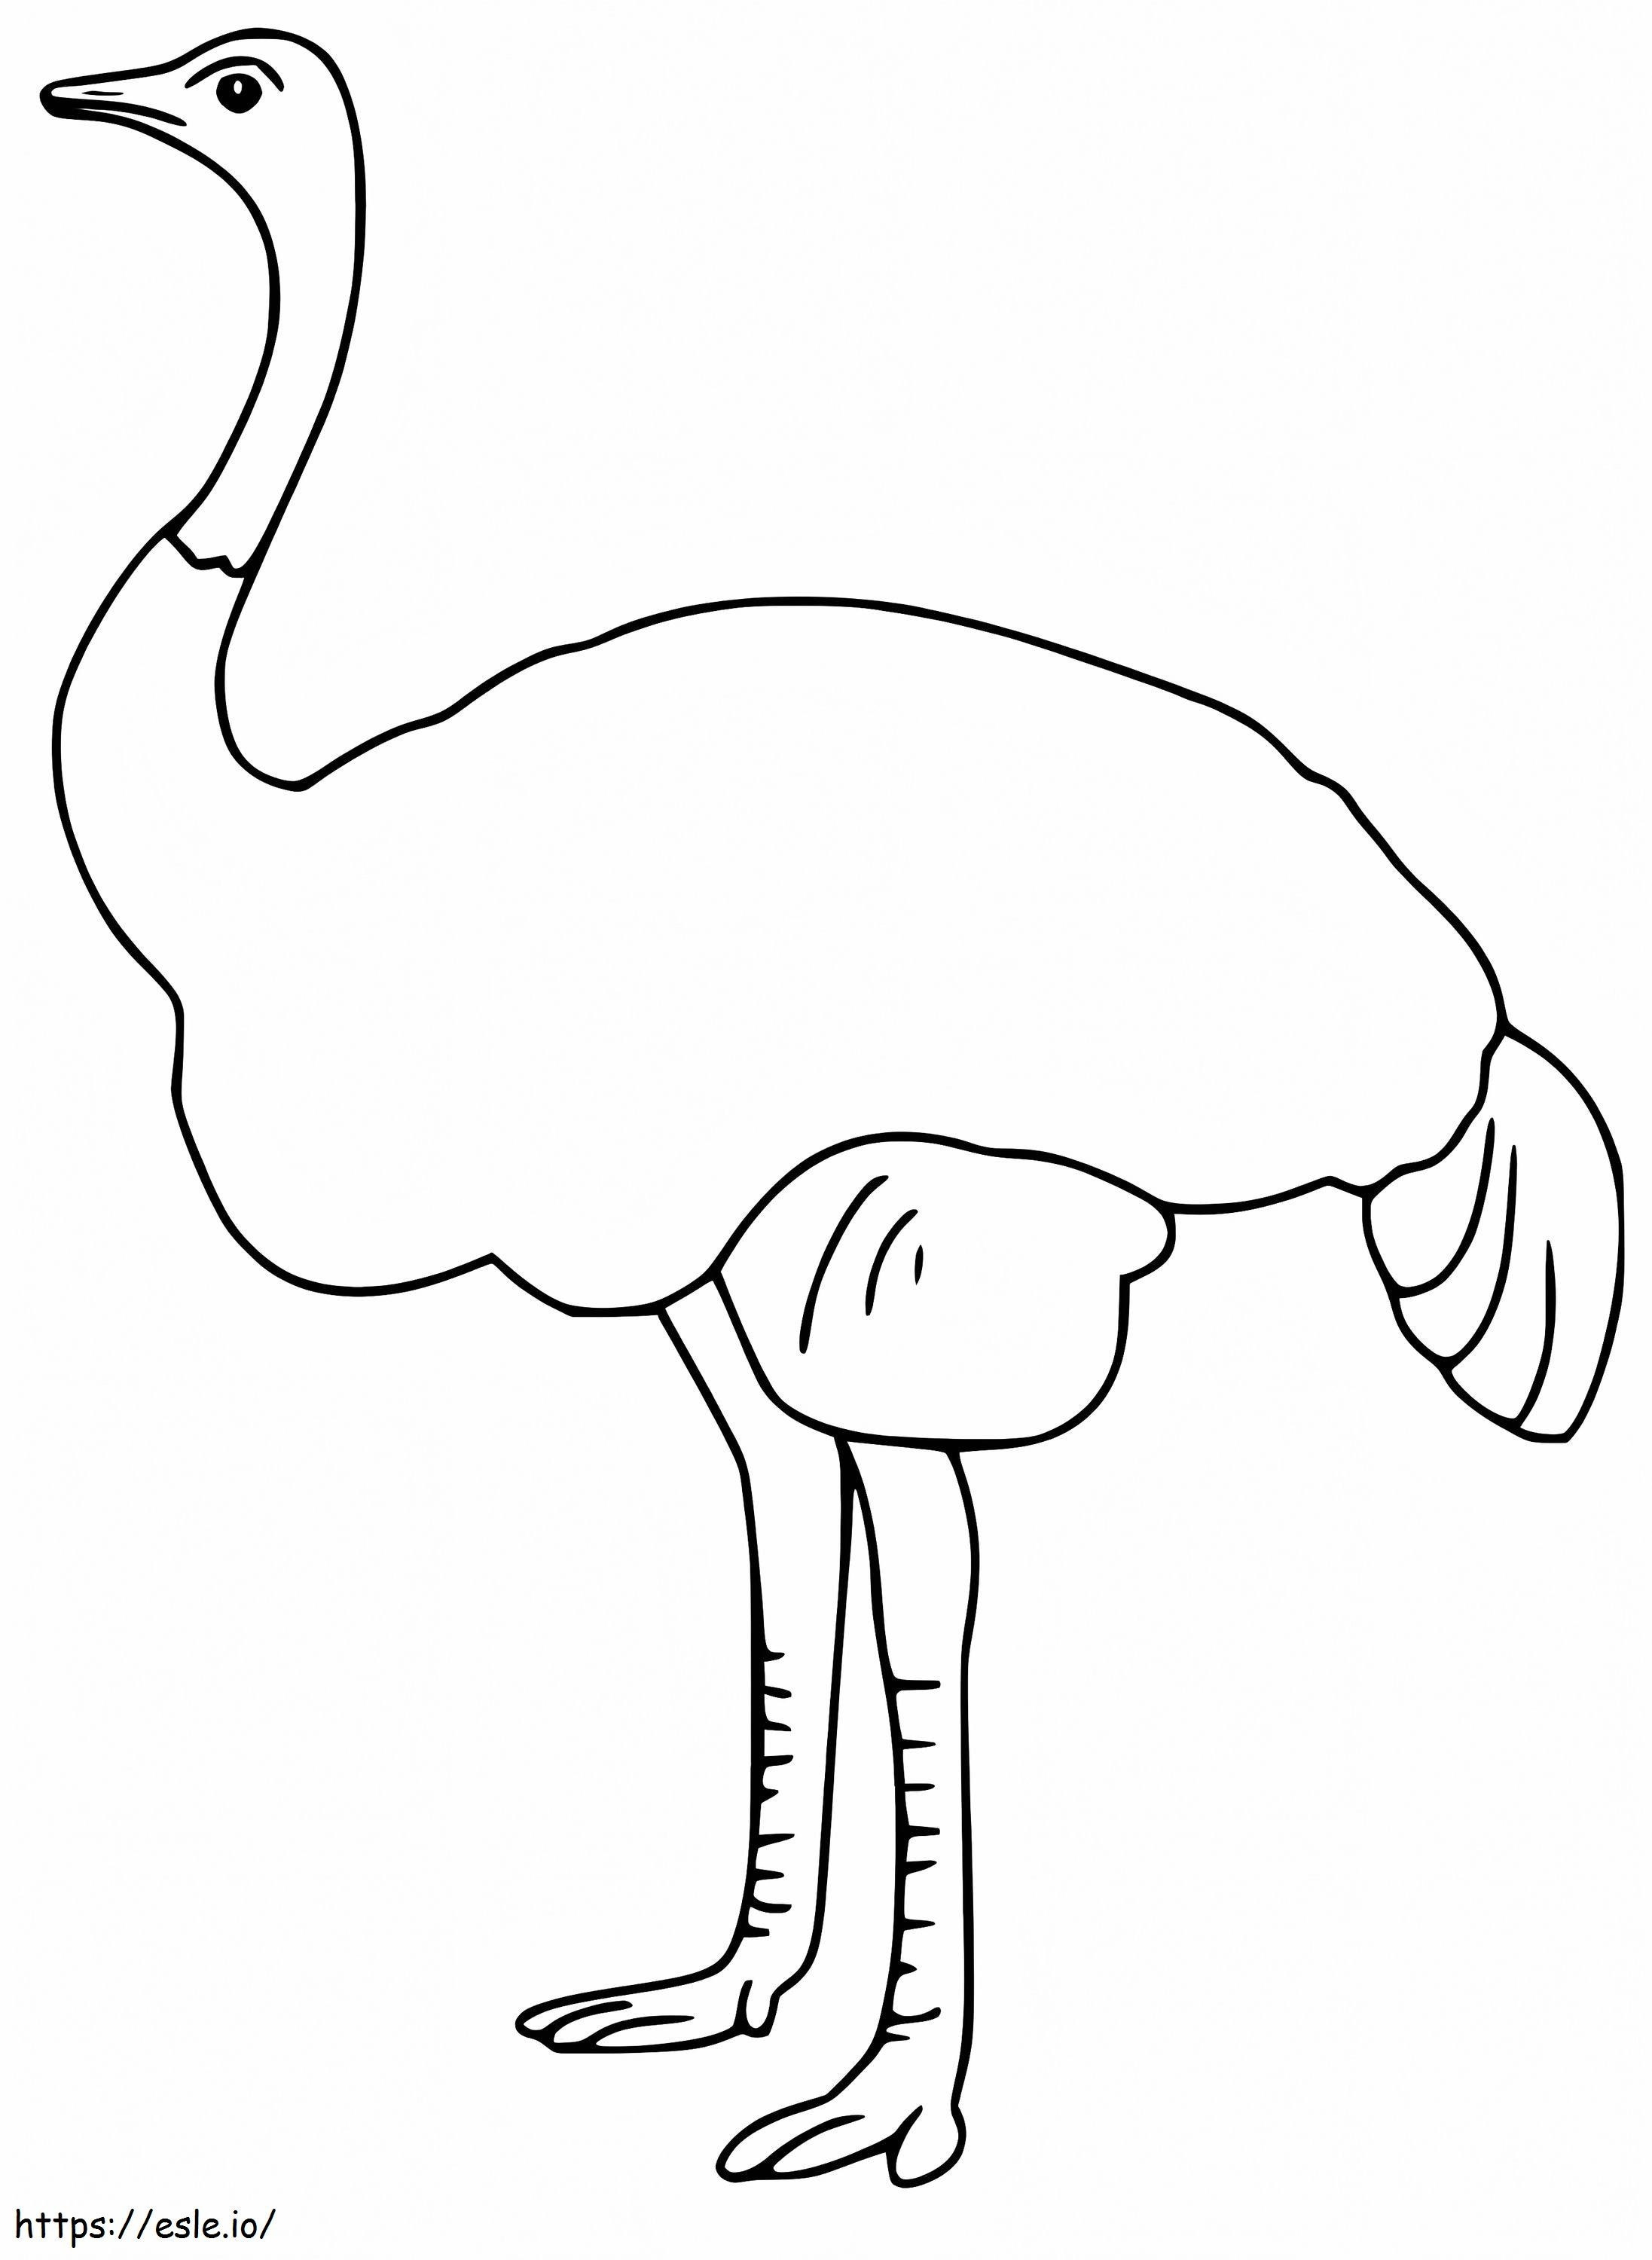 A Simple Emu coloring page